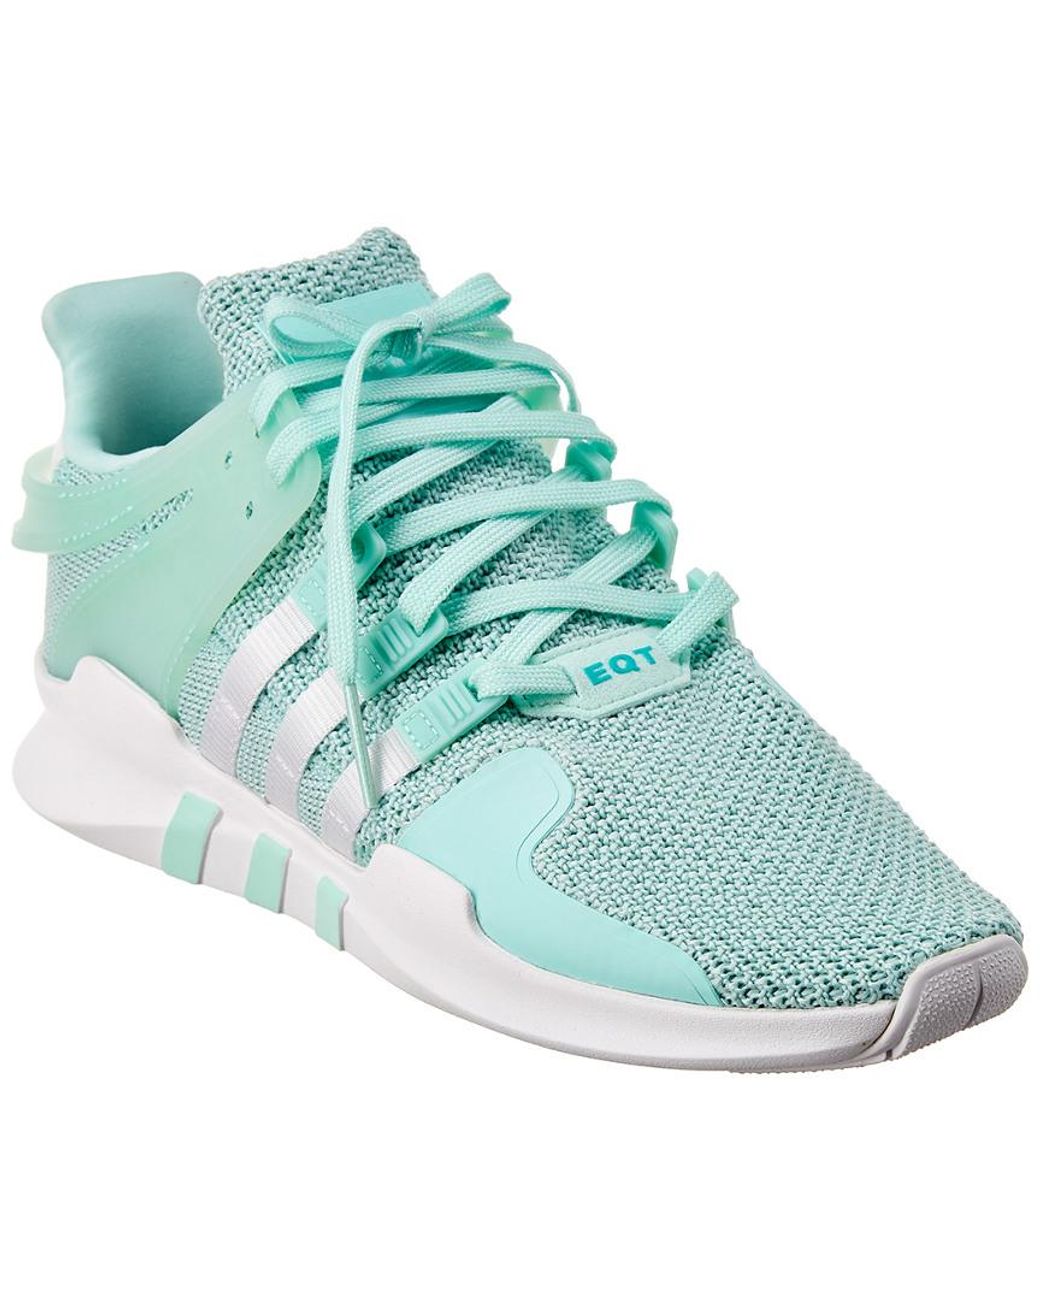 adidas Eqt Support Adv Sneaker in Teal 